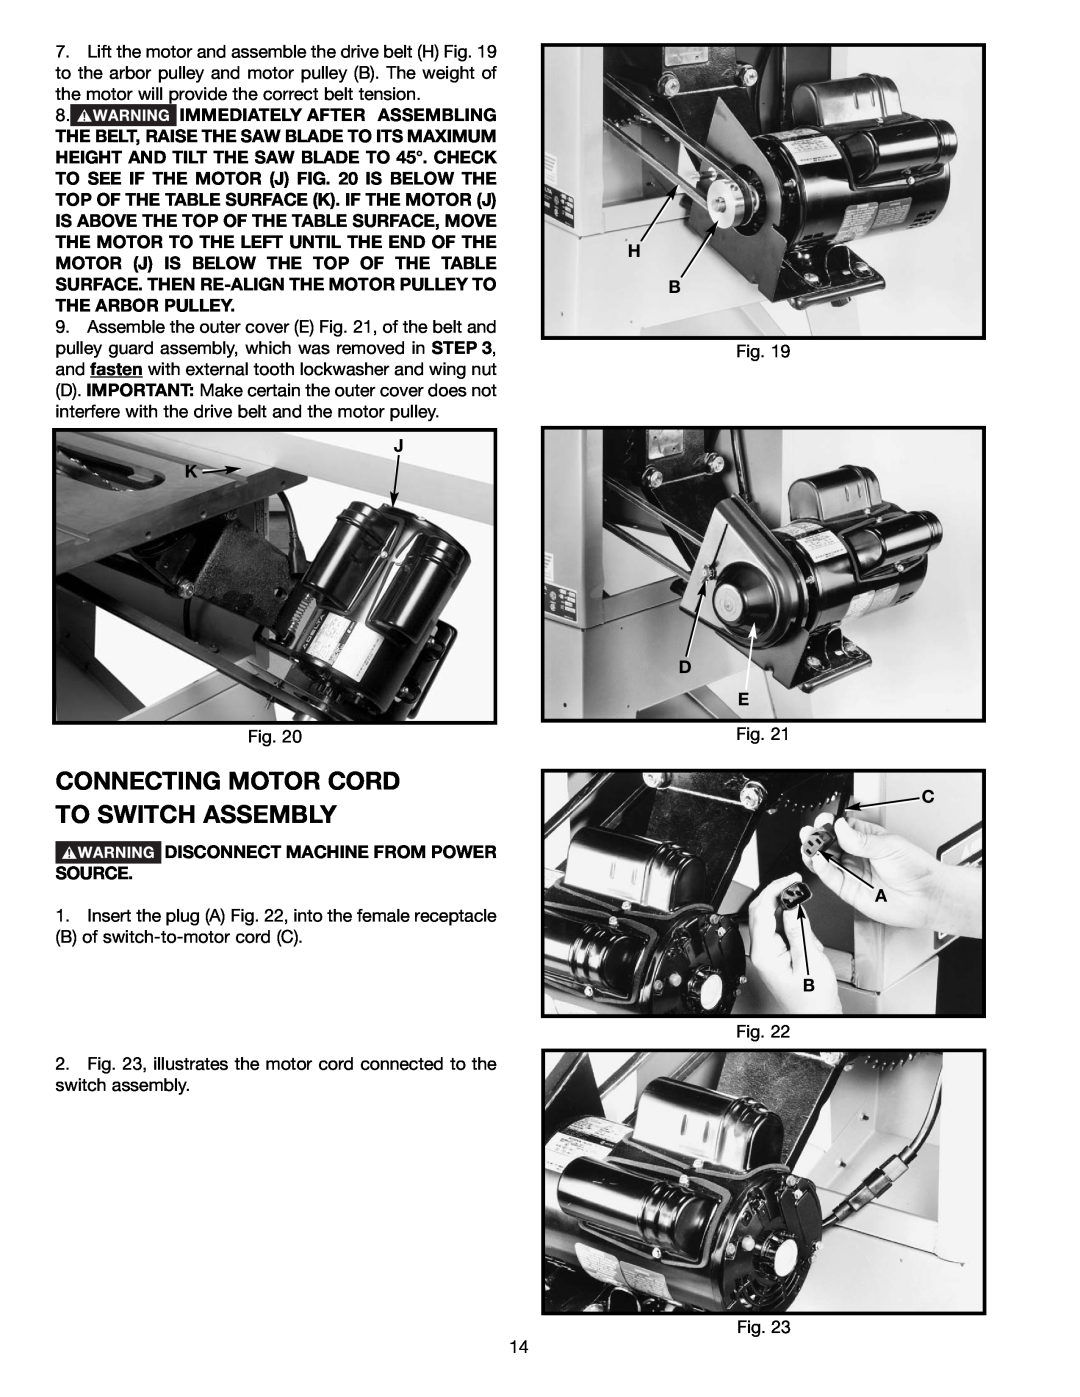 Delta 36-465 instruction manual Connecting Motor Cord To Switch Assembly, C A B, Disconnect Machine From Power Source 